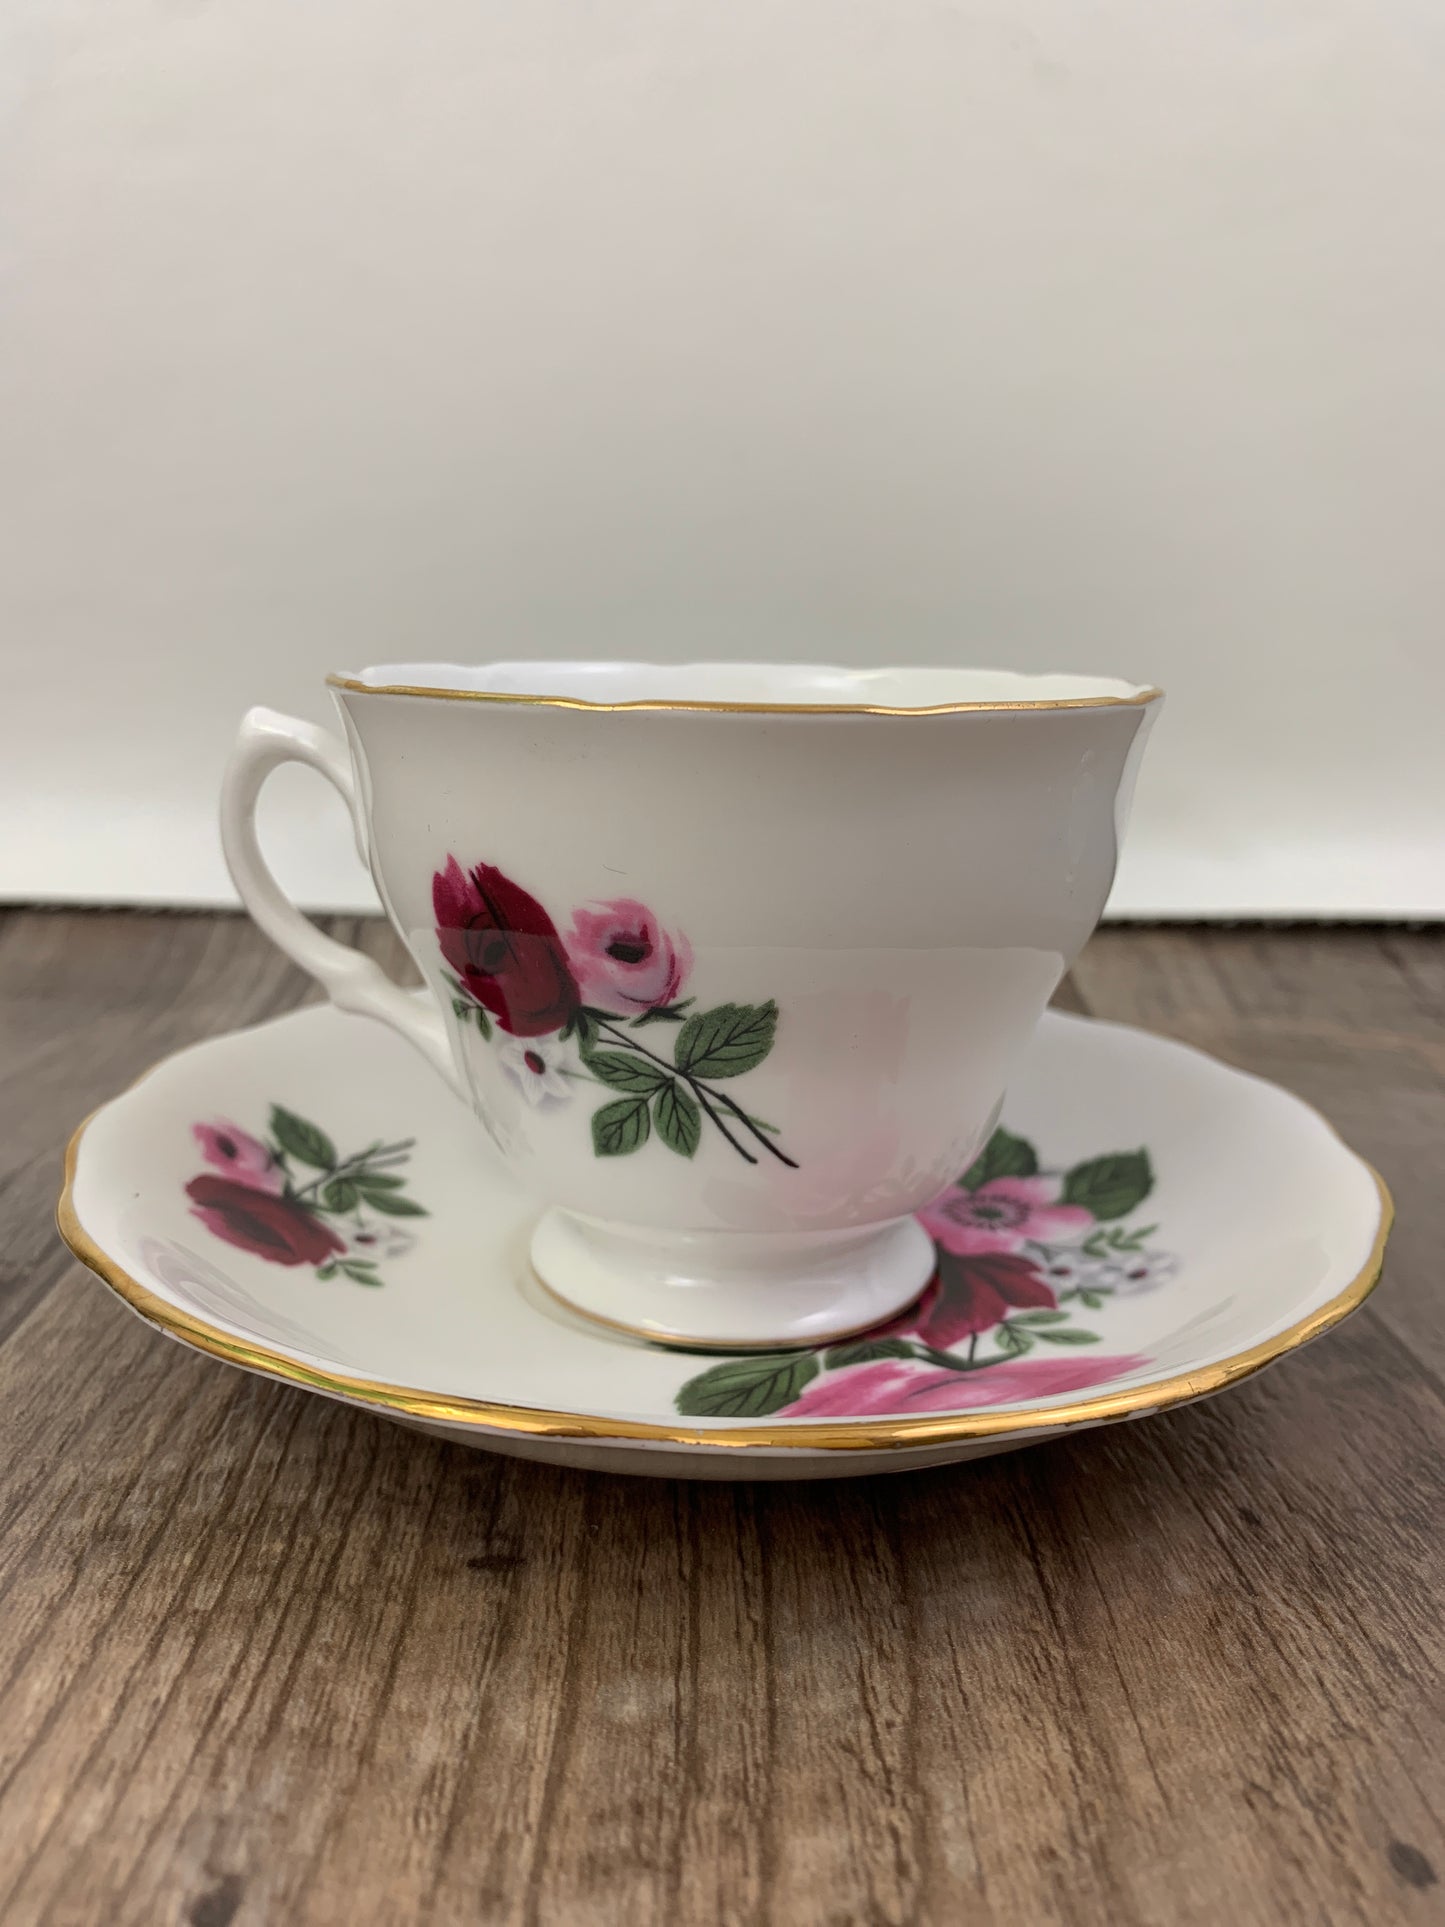 Vintage Teacup with Pink and Red Roses Queen Anne Vintage Tea Cup Pink Red